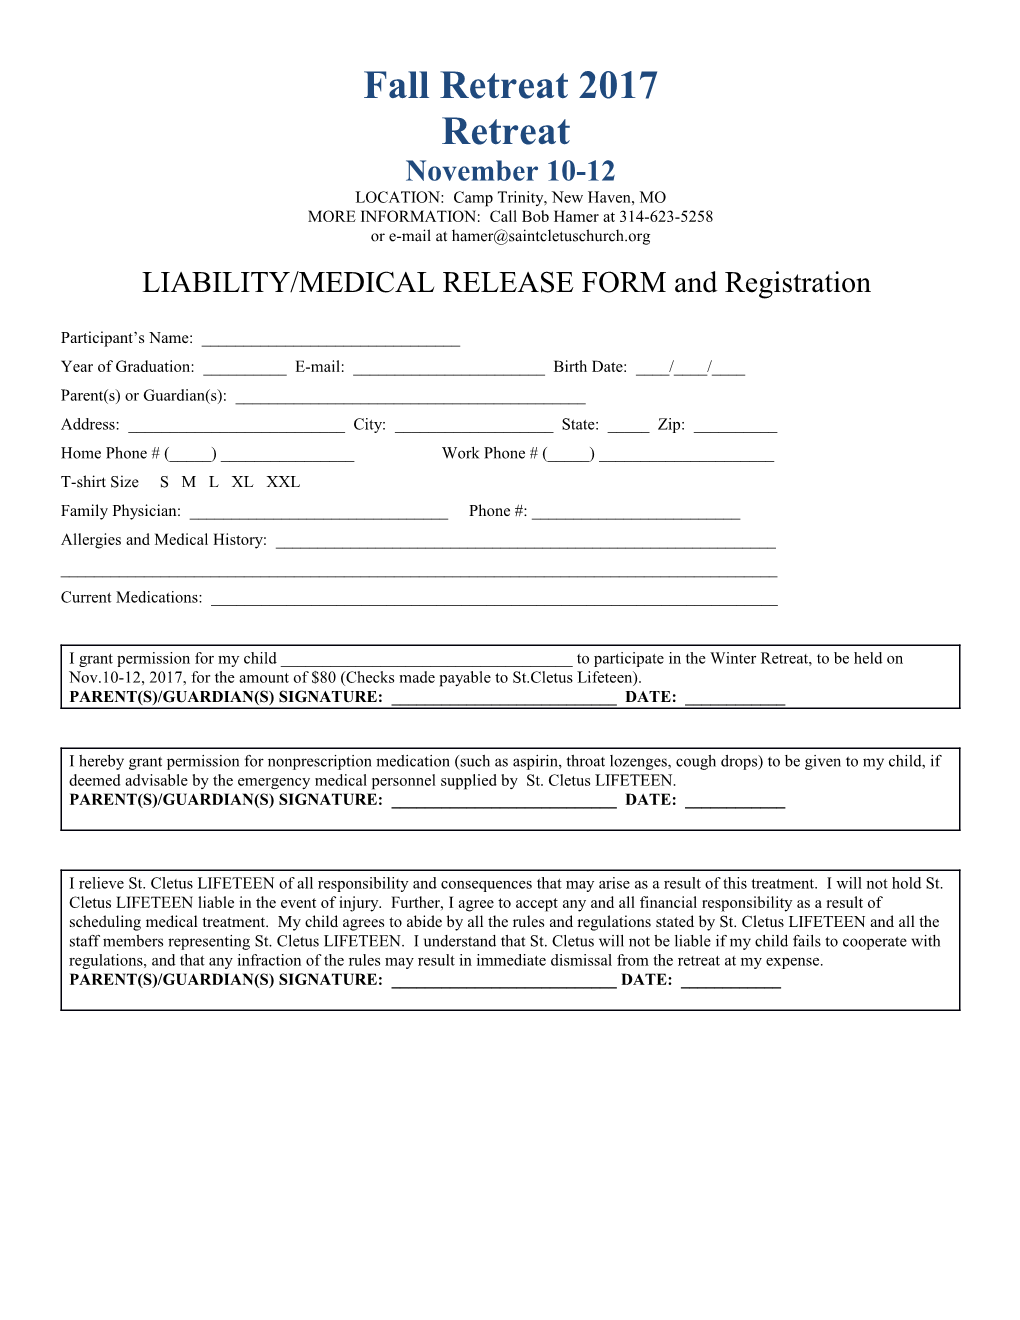 LIABILITY/MEDICAL RELEASE FORM and Registration